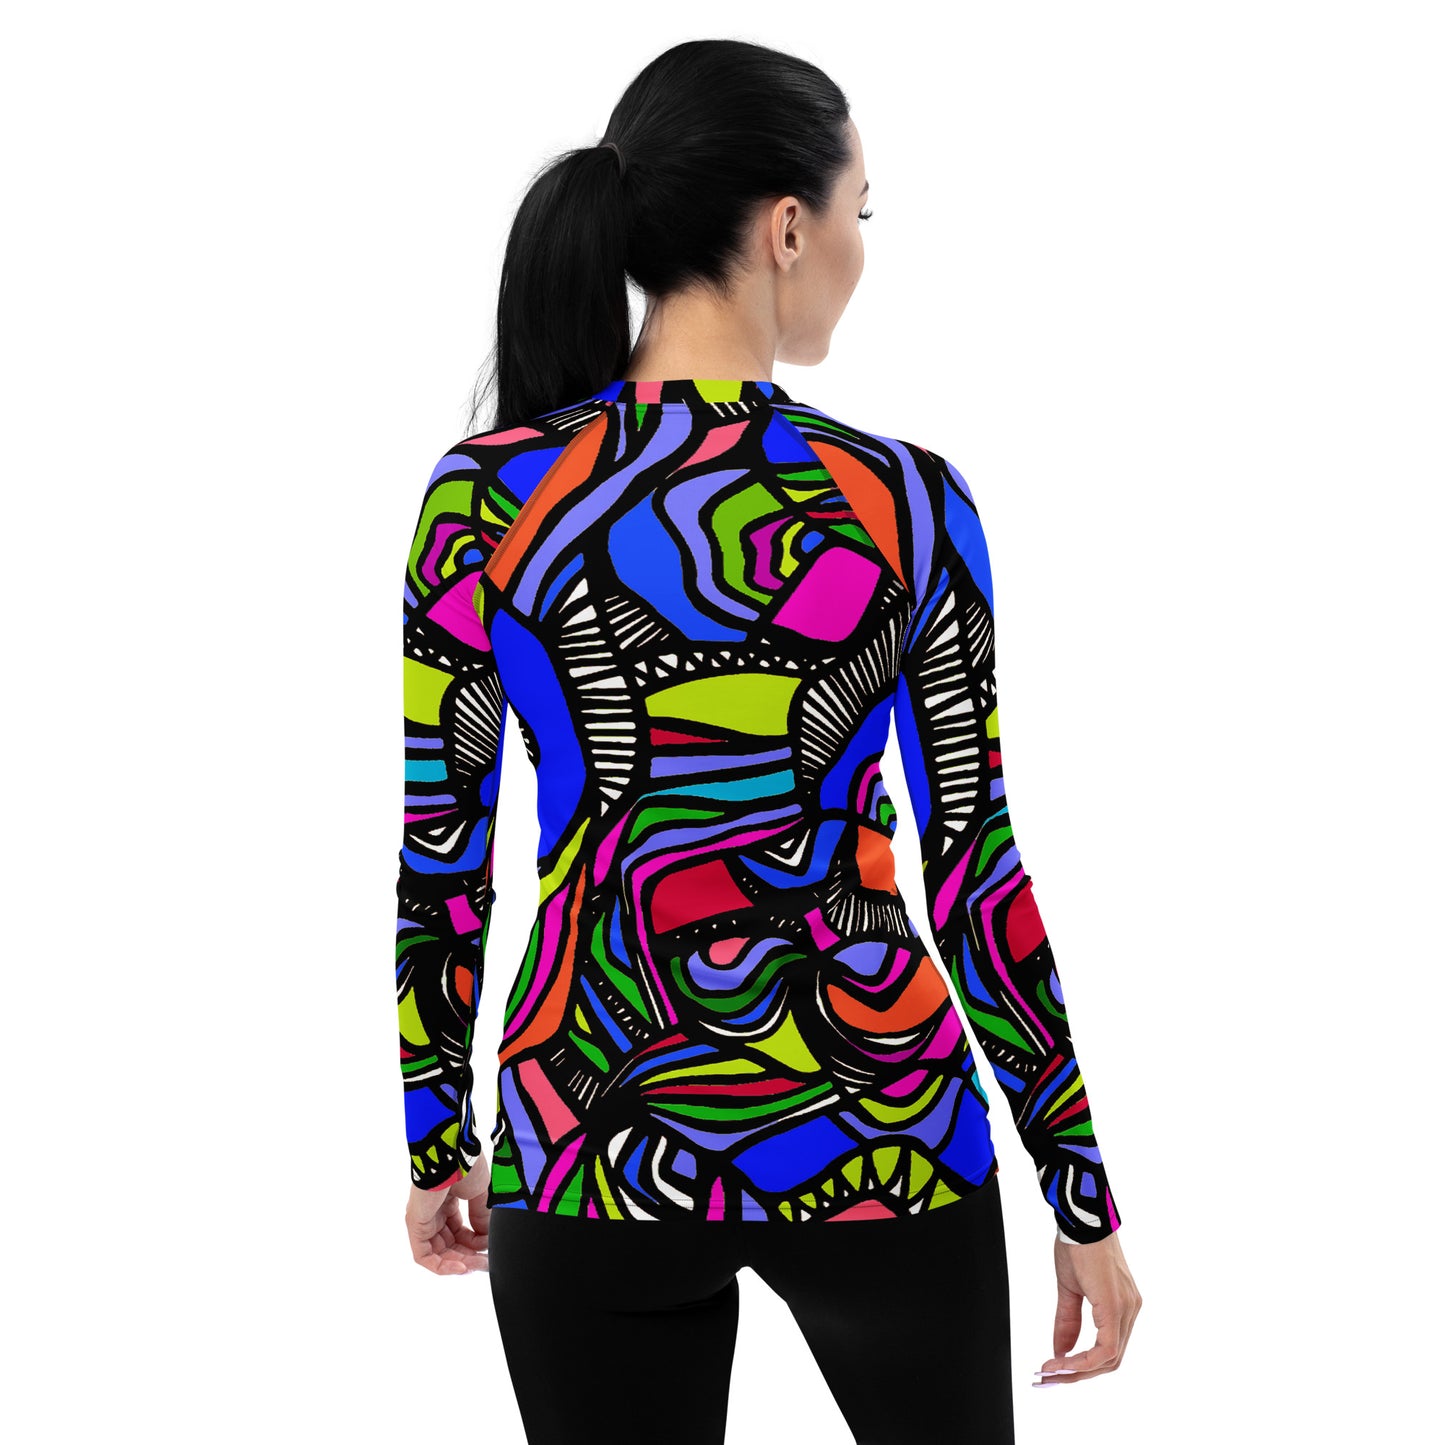 It's a Colorful Whirled Long Sleeve Top